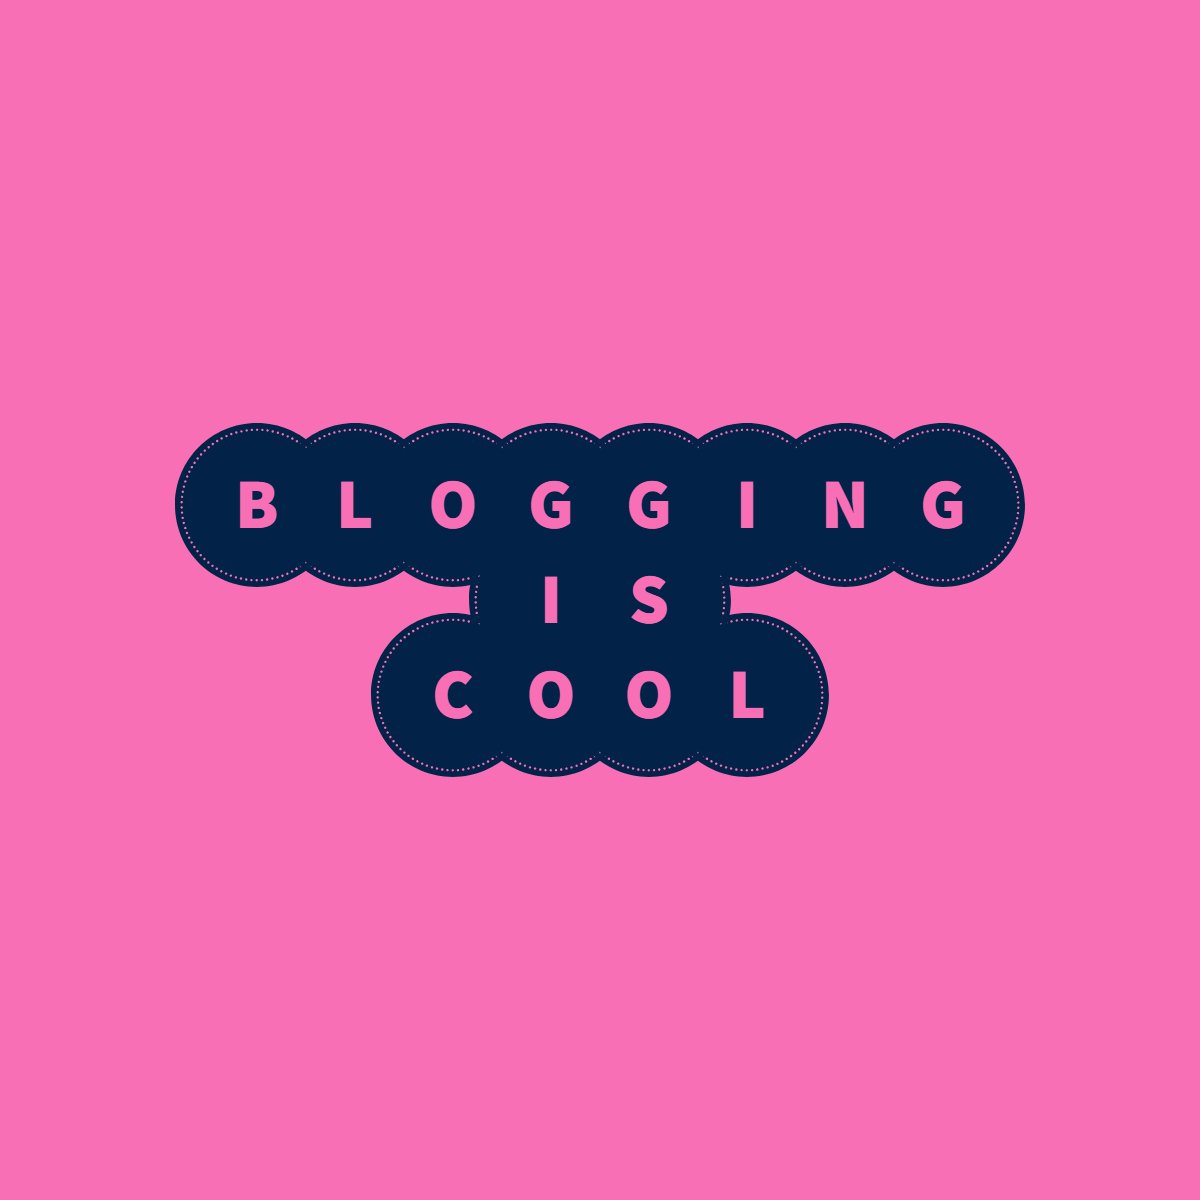 bloggingiscool.com calls to action on your blog